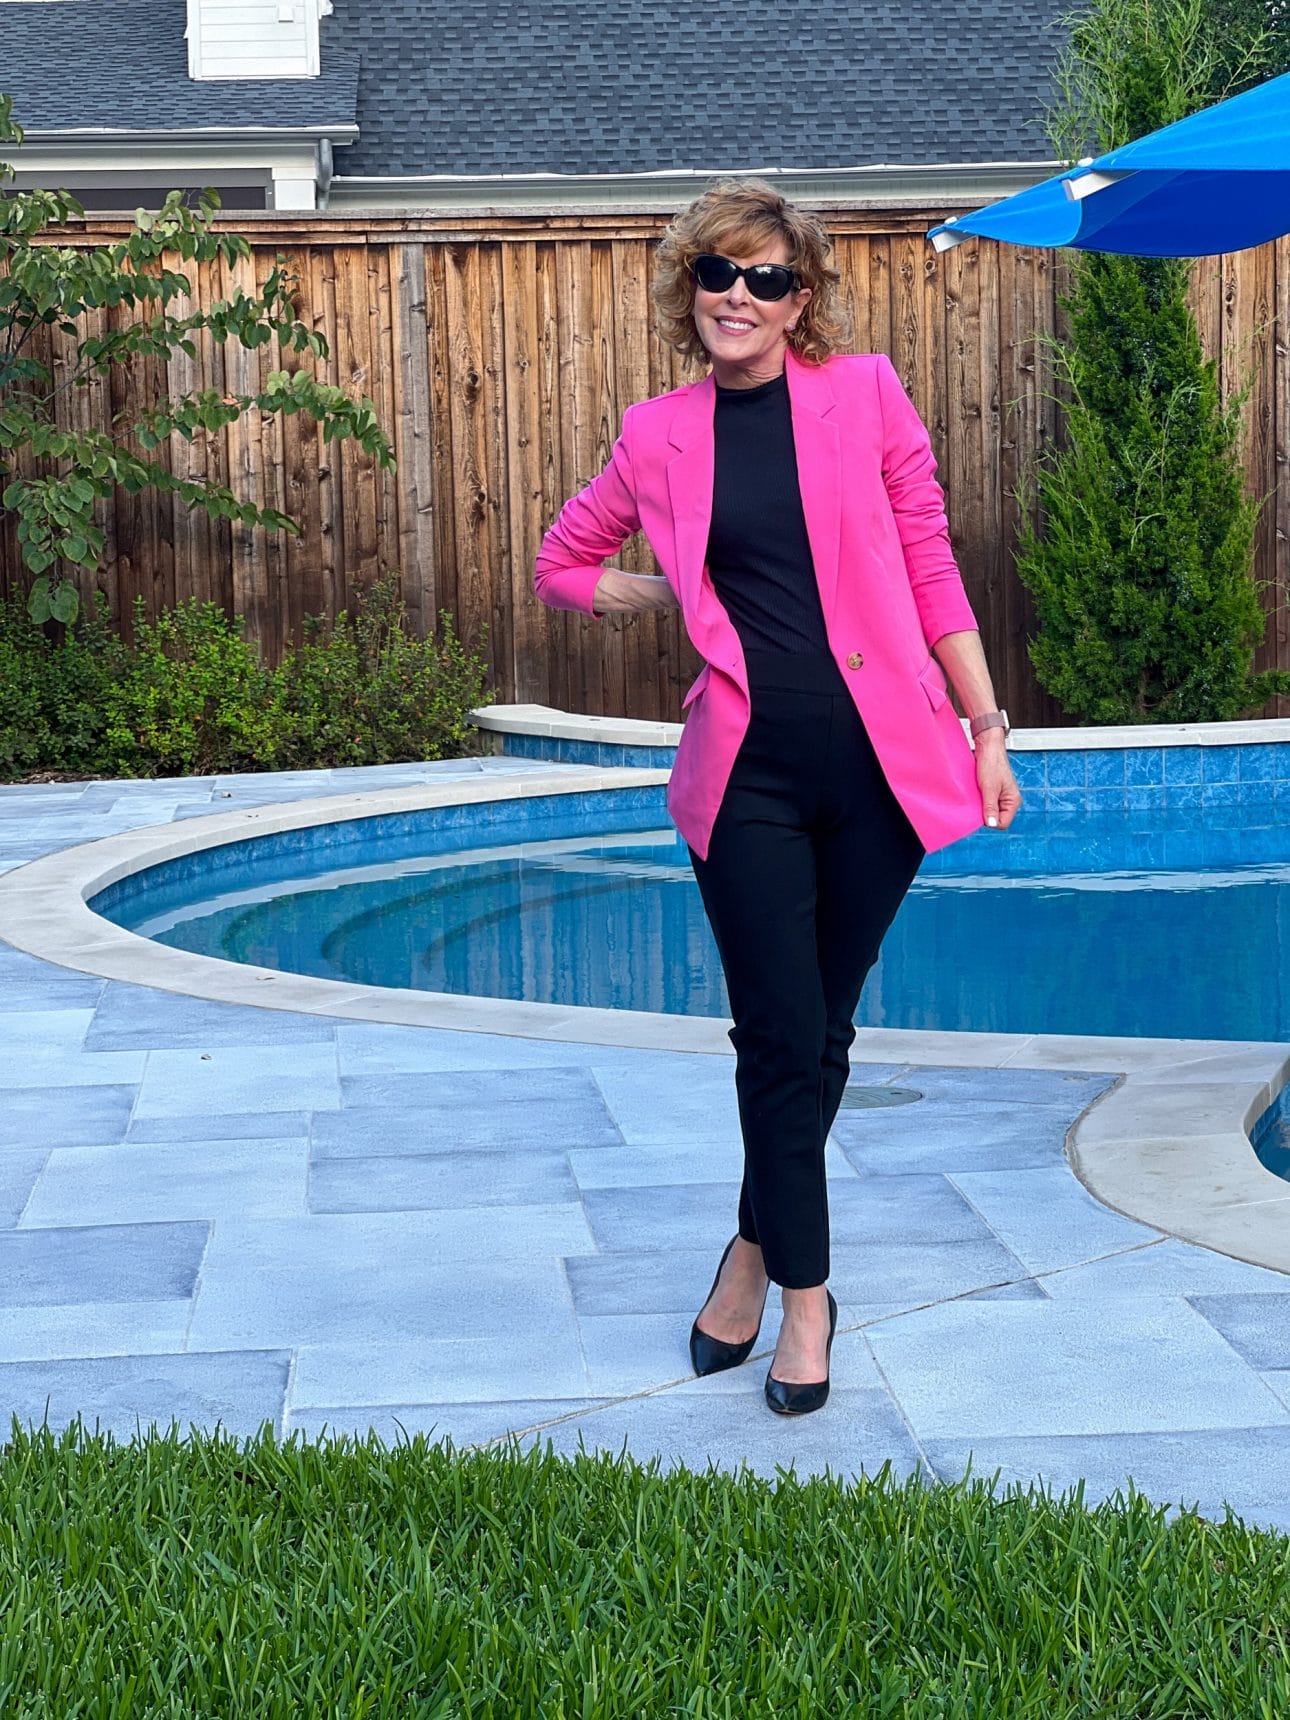 woman in sunglasses standing by a pool wearing black pants and pumps with a hot pink blazer unbuttoned